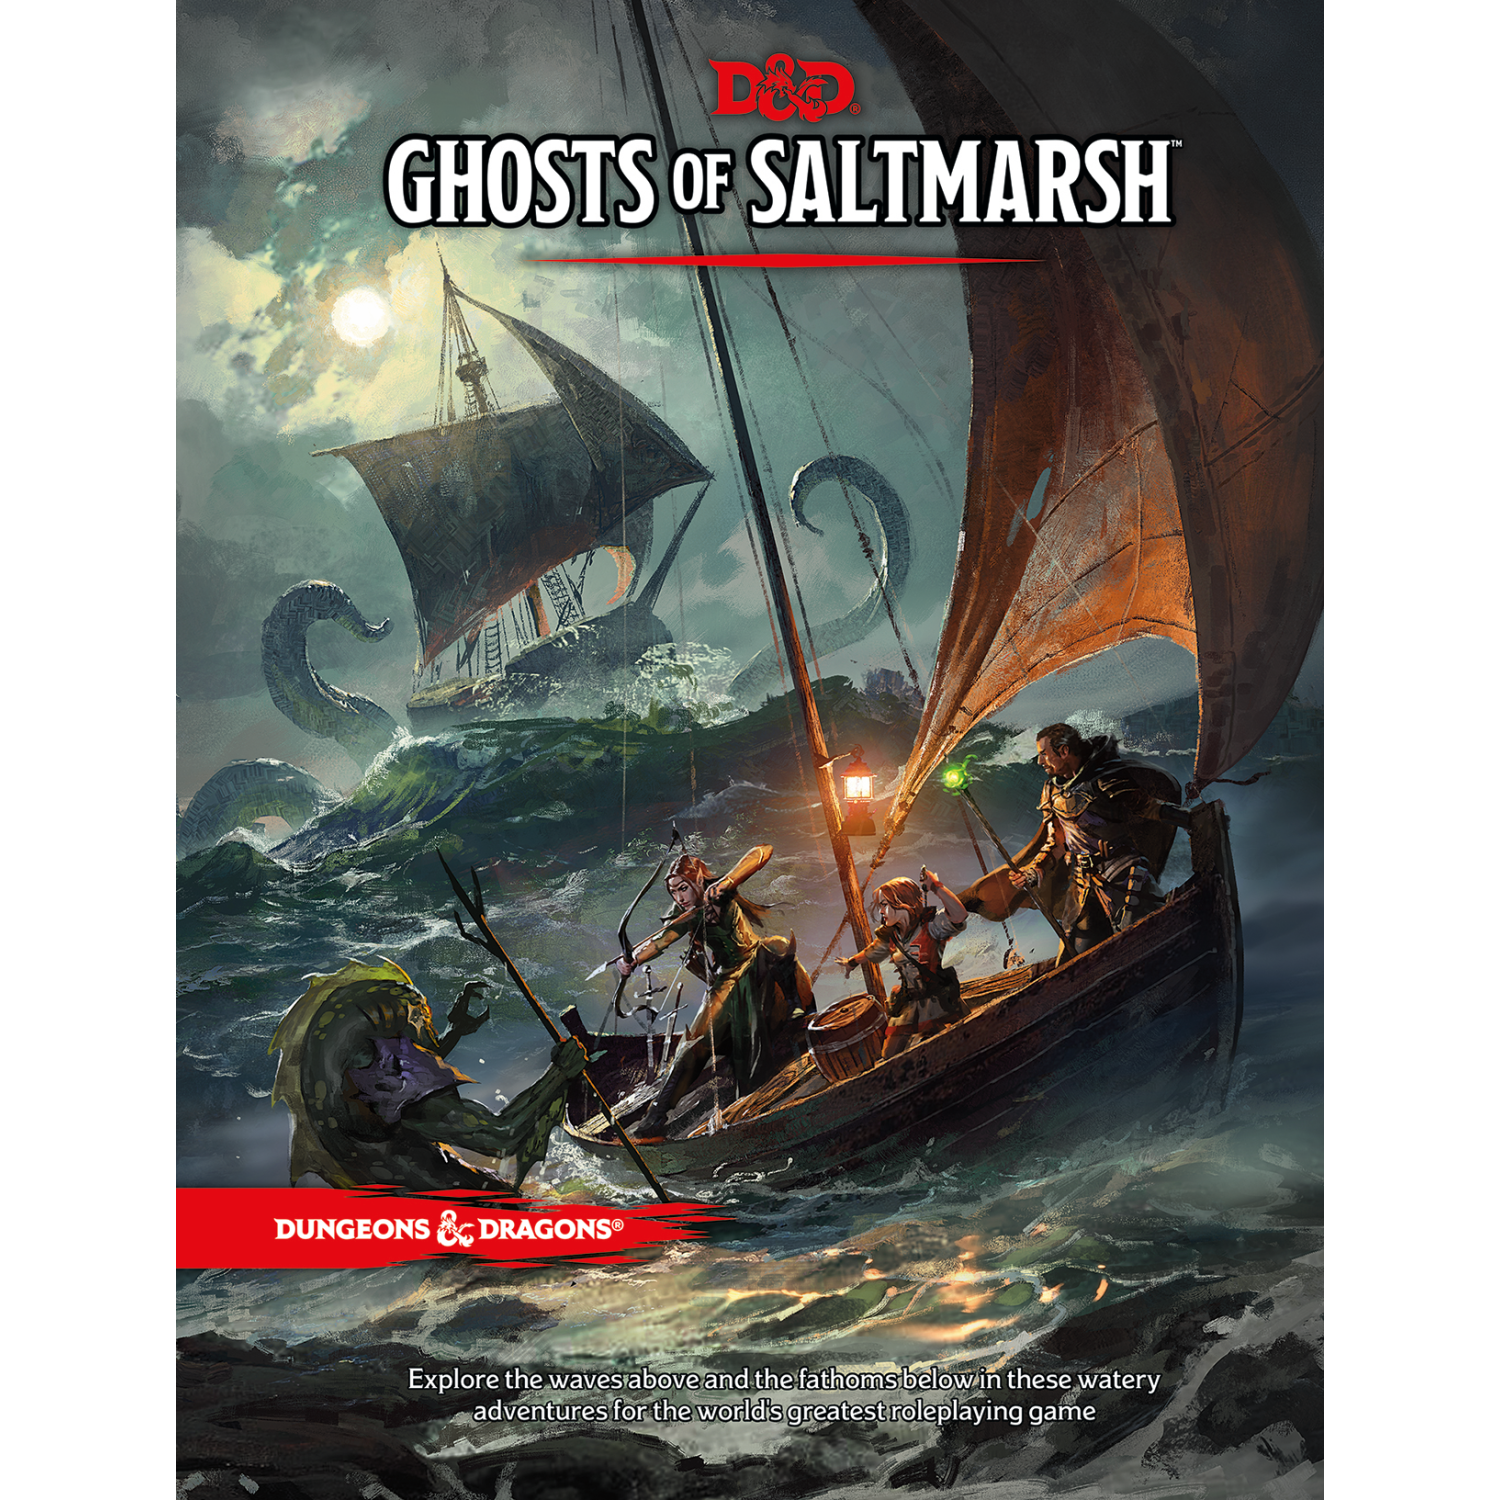 Dungeons & Dragons: Ghosts of Saltmarsh Book, Hard Cover